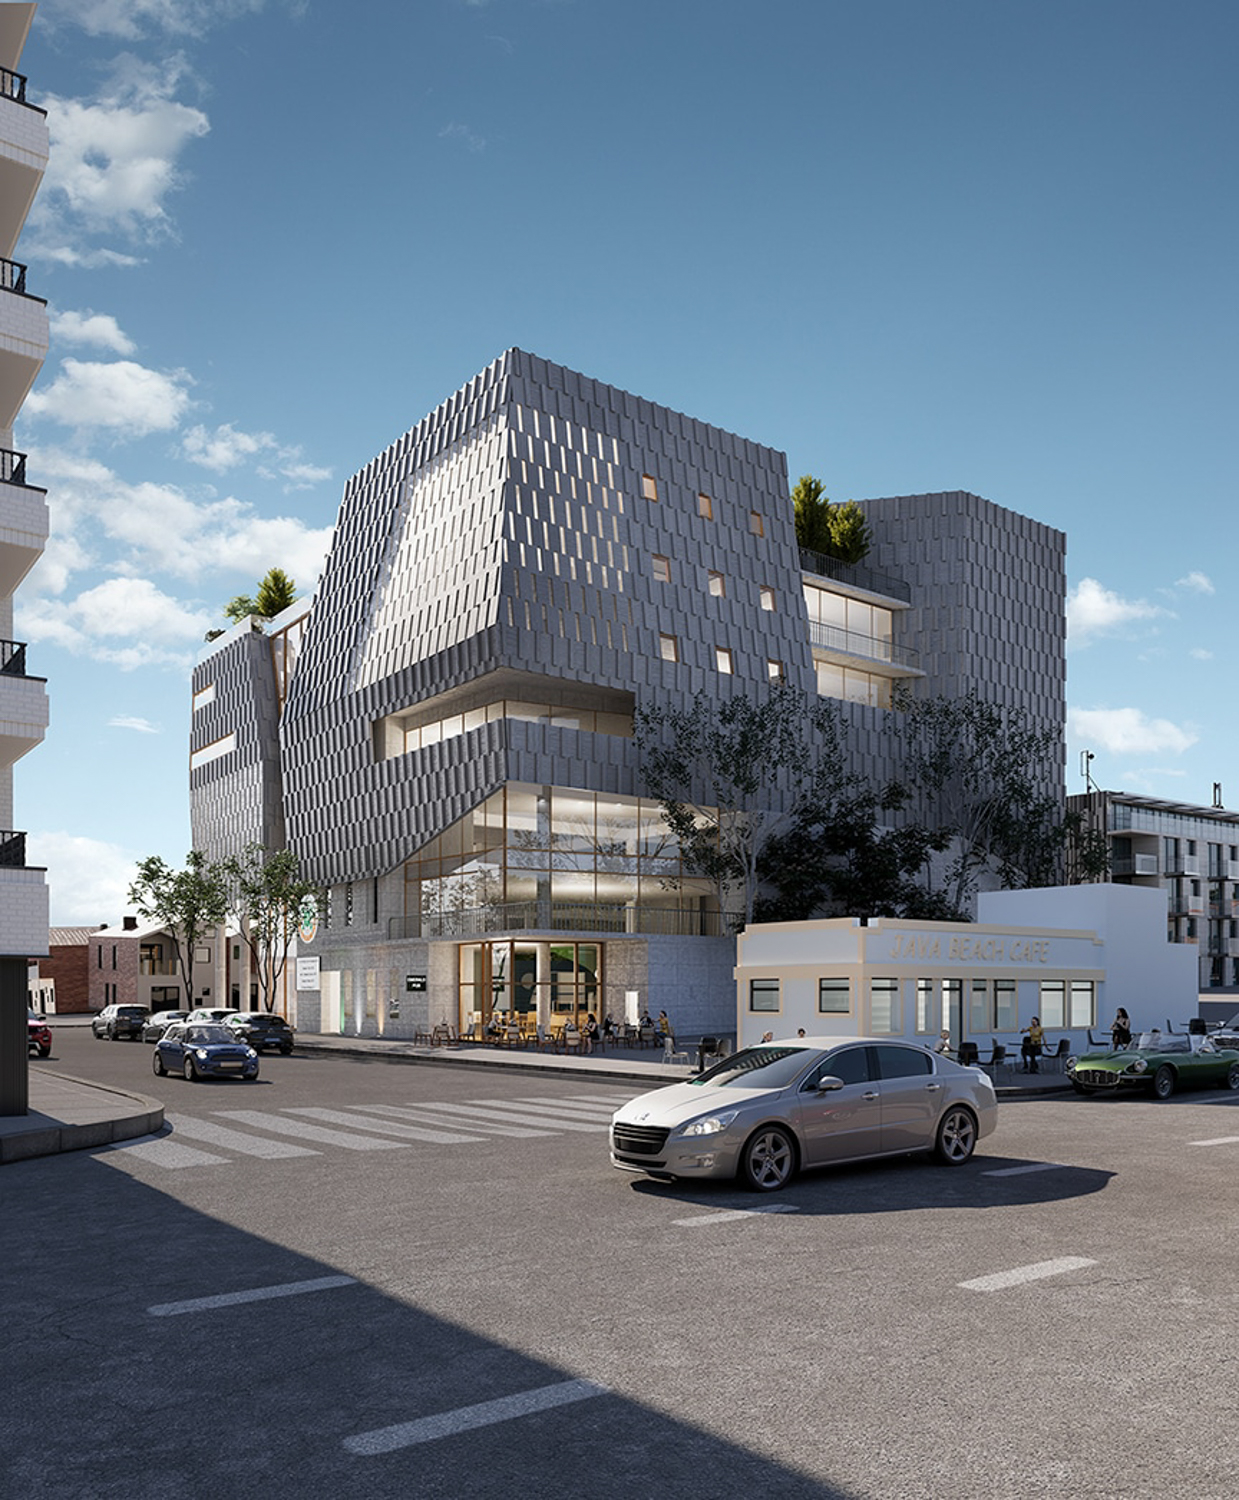 United Irish Cultural Center from 45th and Sloat, design by Studio BANAA